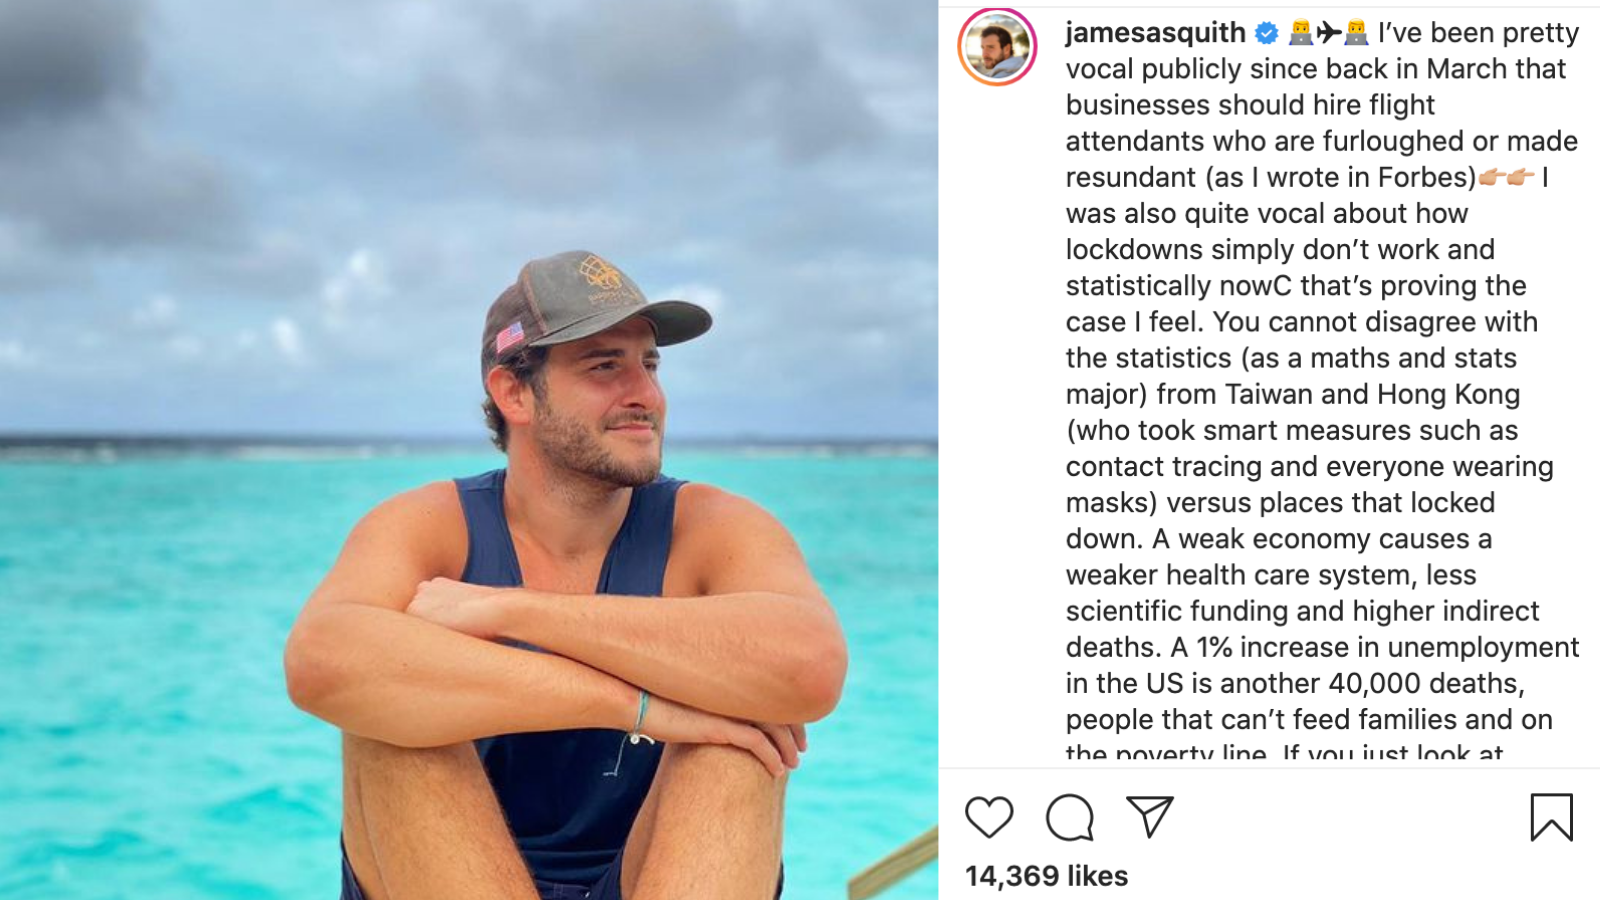 James Asquith, Instagram tech influencer to follow